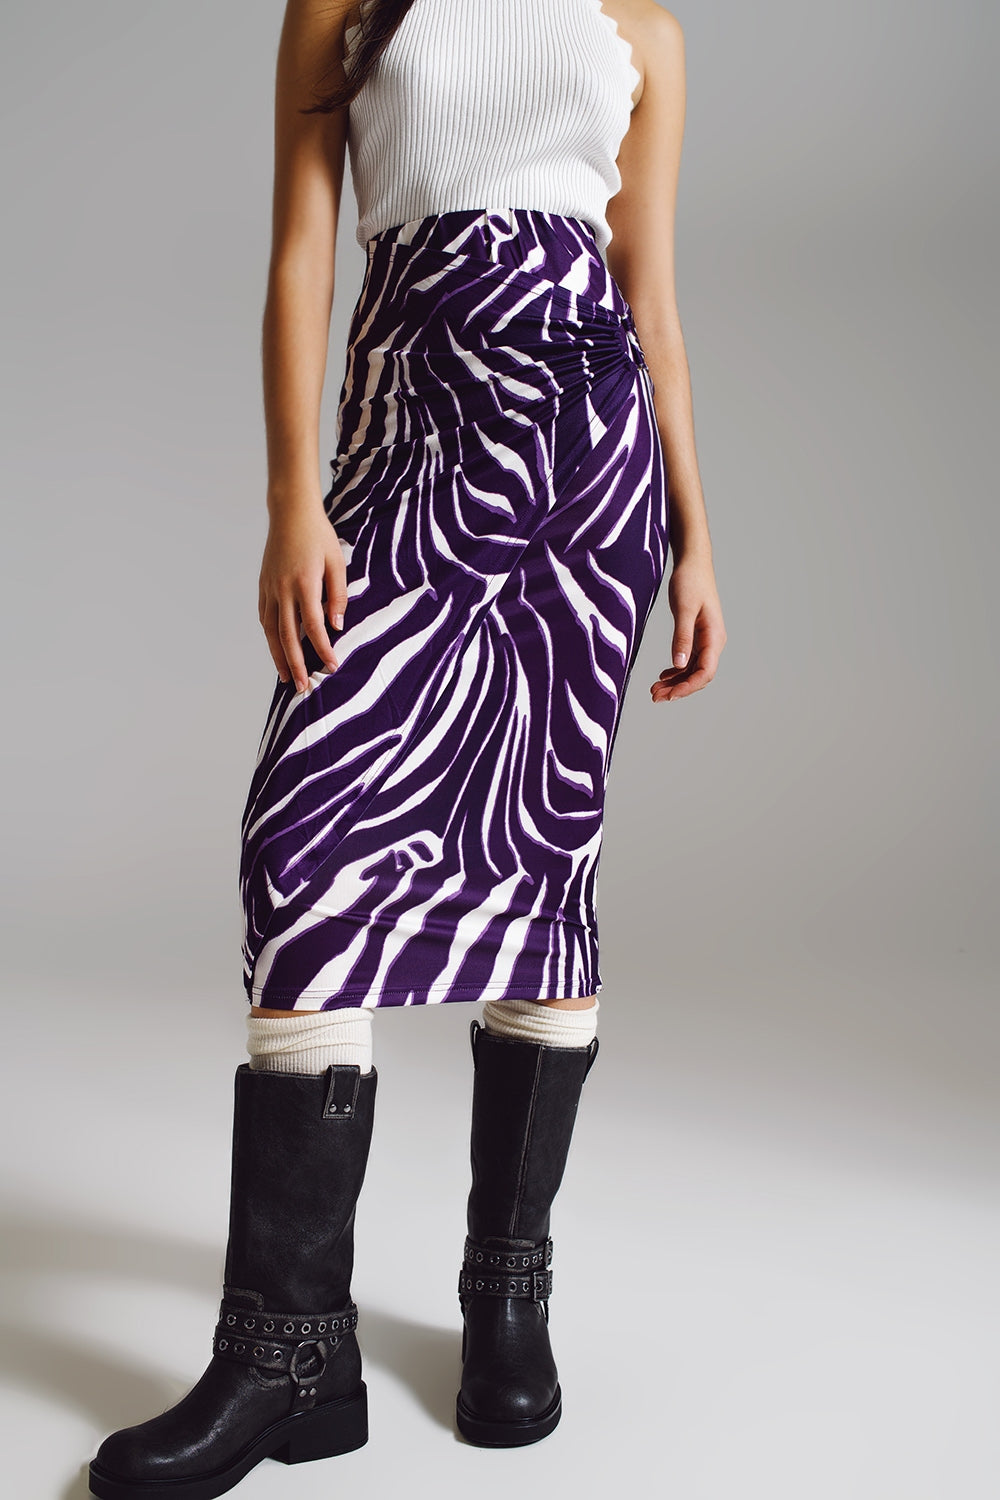 Q2 Wrap skirt with gathered detail at the side in Purple and Cream Zebra Print